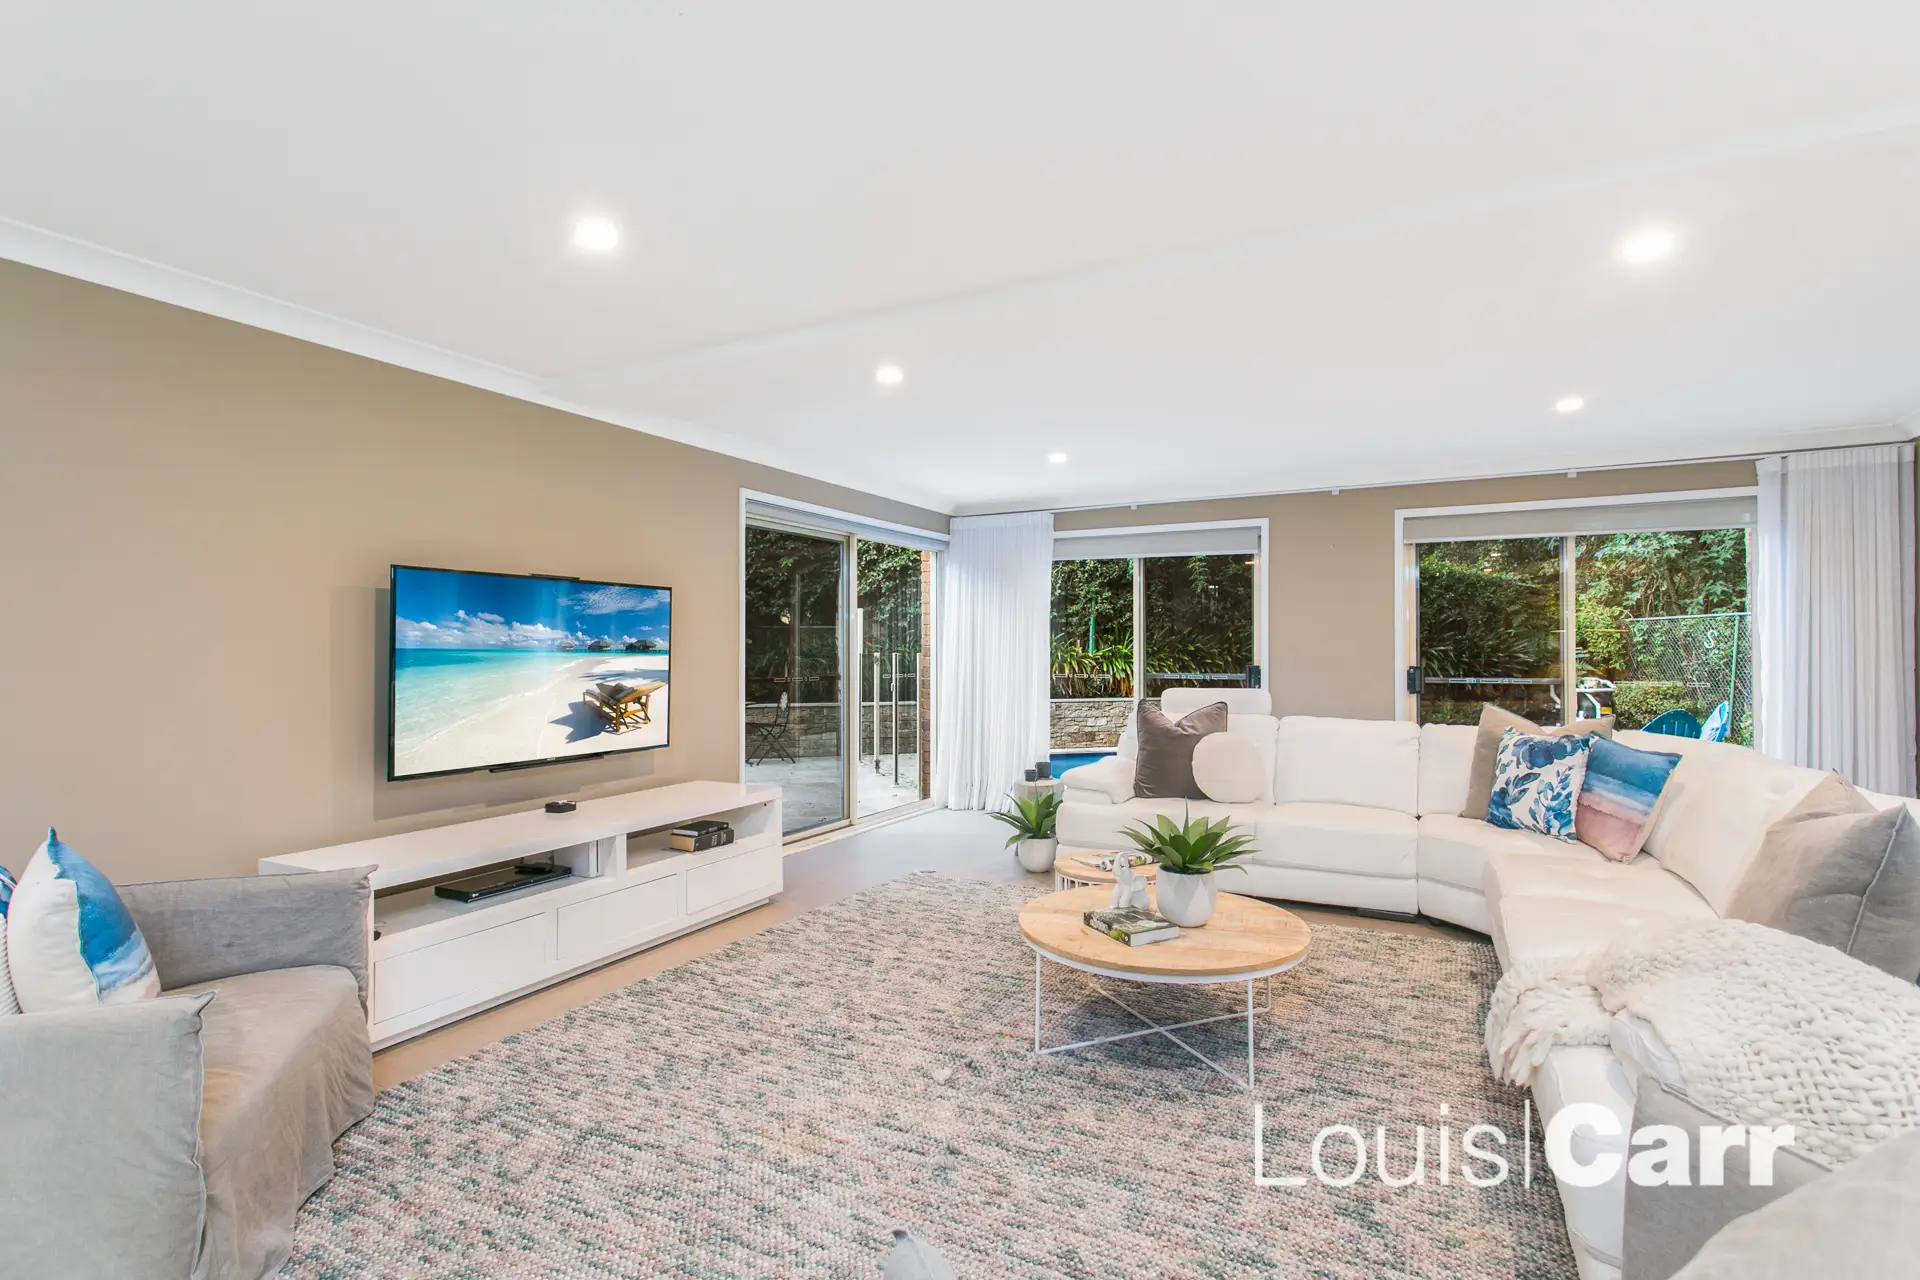 Photo #6: 18 Lyndhurst Court, West Pennant Hills - Sold by Louis Carr Real Estate